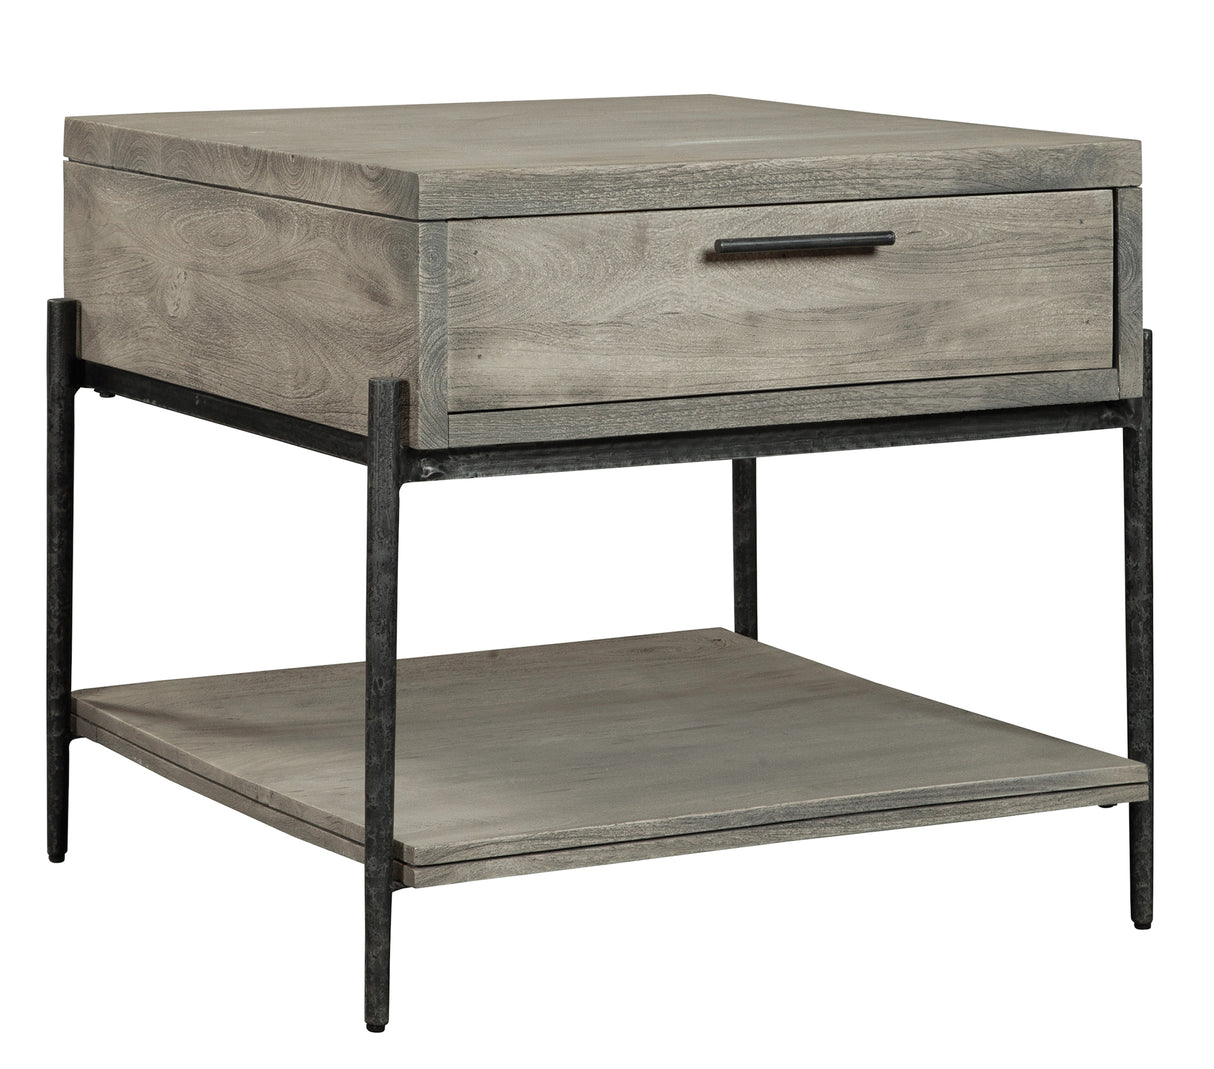 Hekman 24903 Bedford Park 28.25in. x 29.25in. x 26.5in. End Table